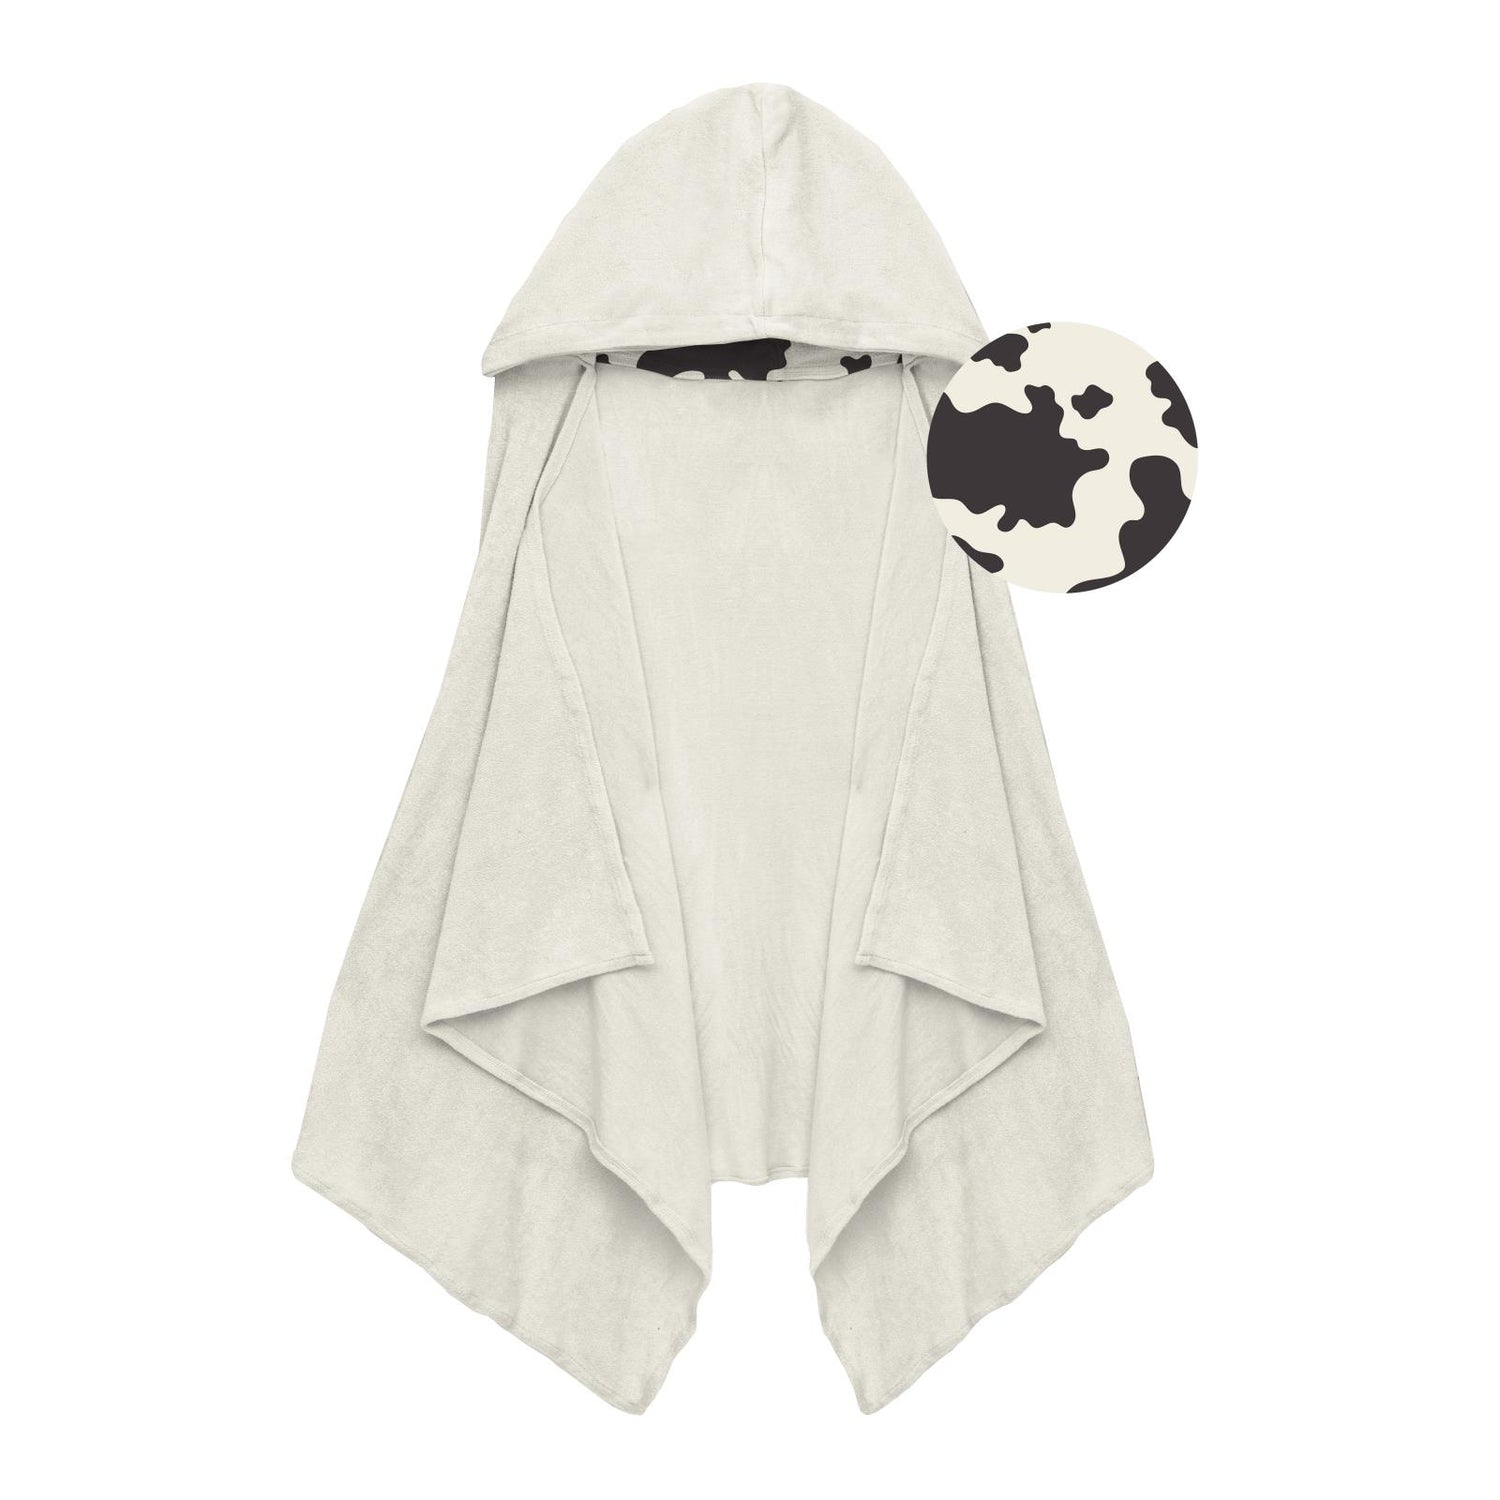 Terry Hooded Towel with Lined Hood in Natural with Cow Print